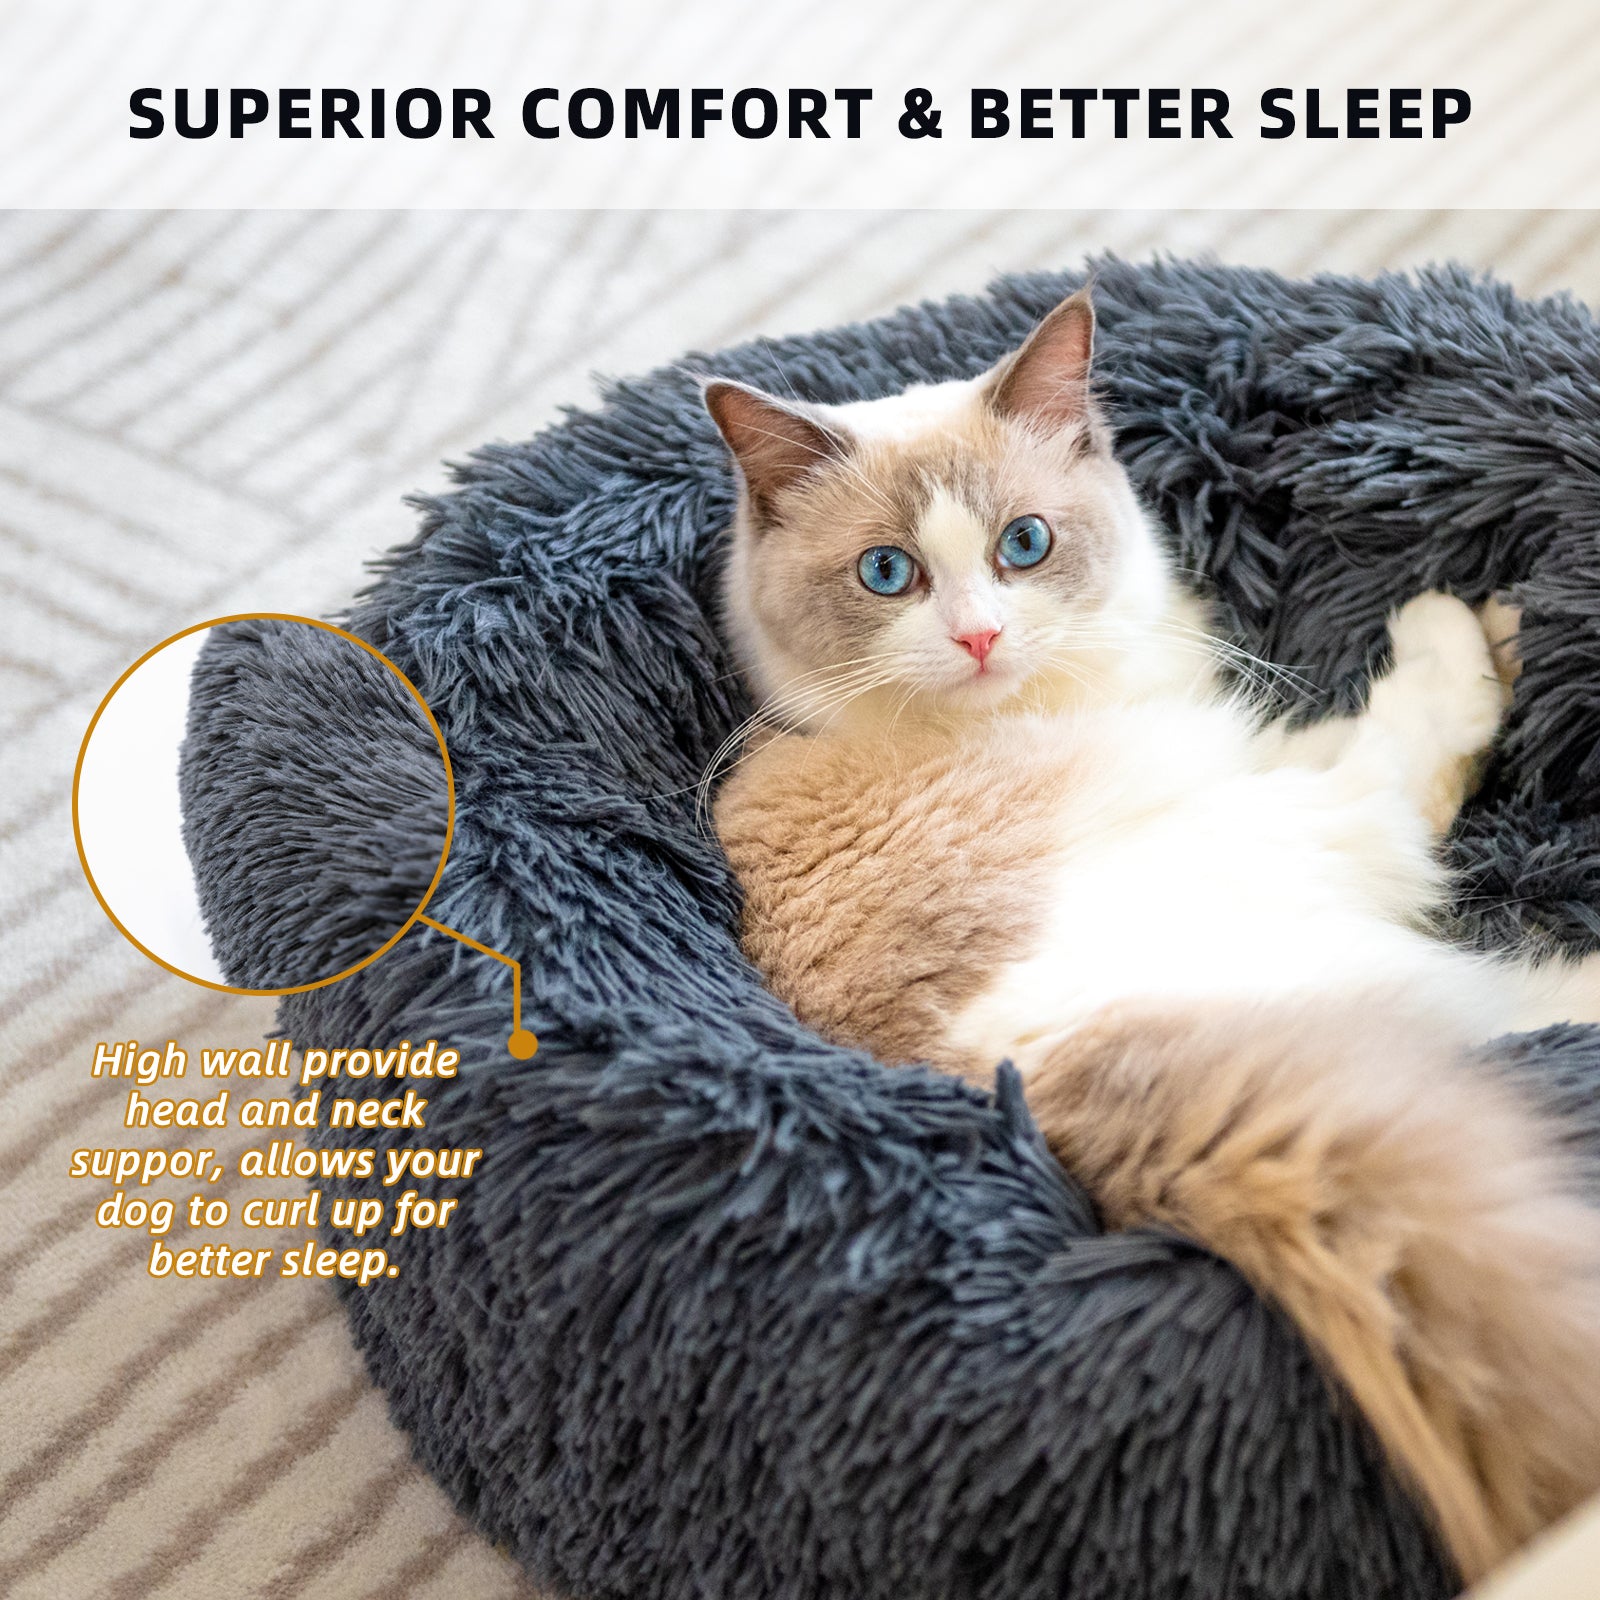 Pet Beds Anti Anxiety Fluffy With Anti-Slip & Water-Resistant Bottom Washable Calming